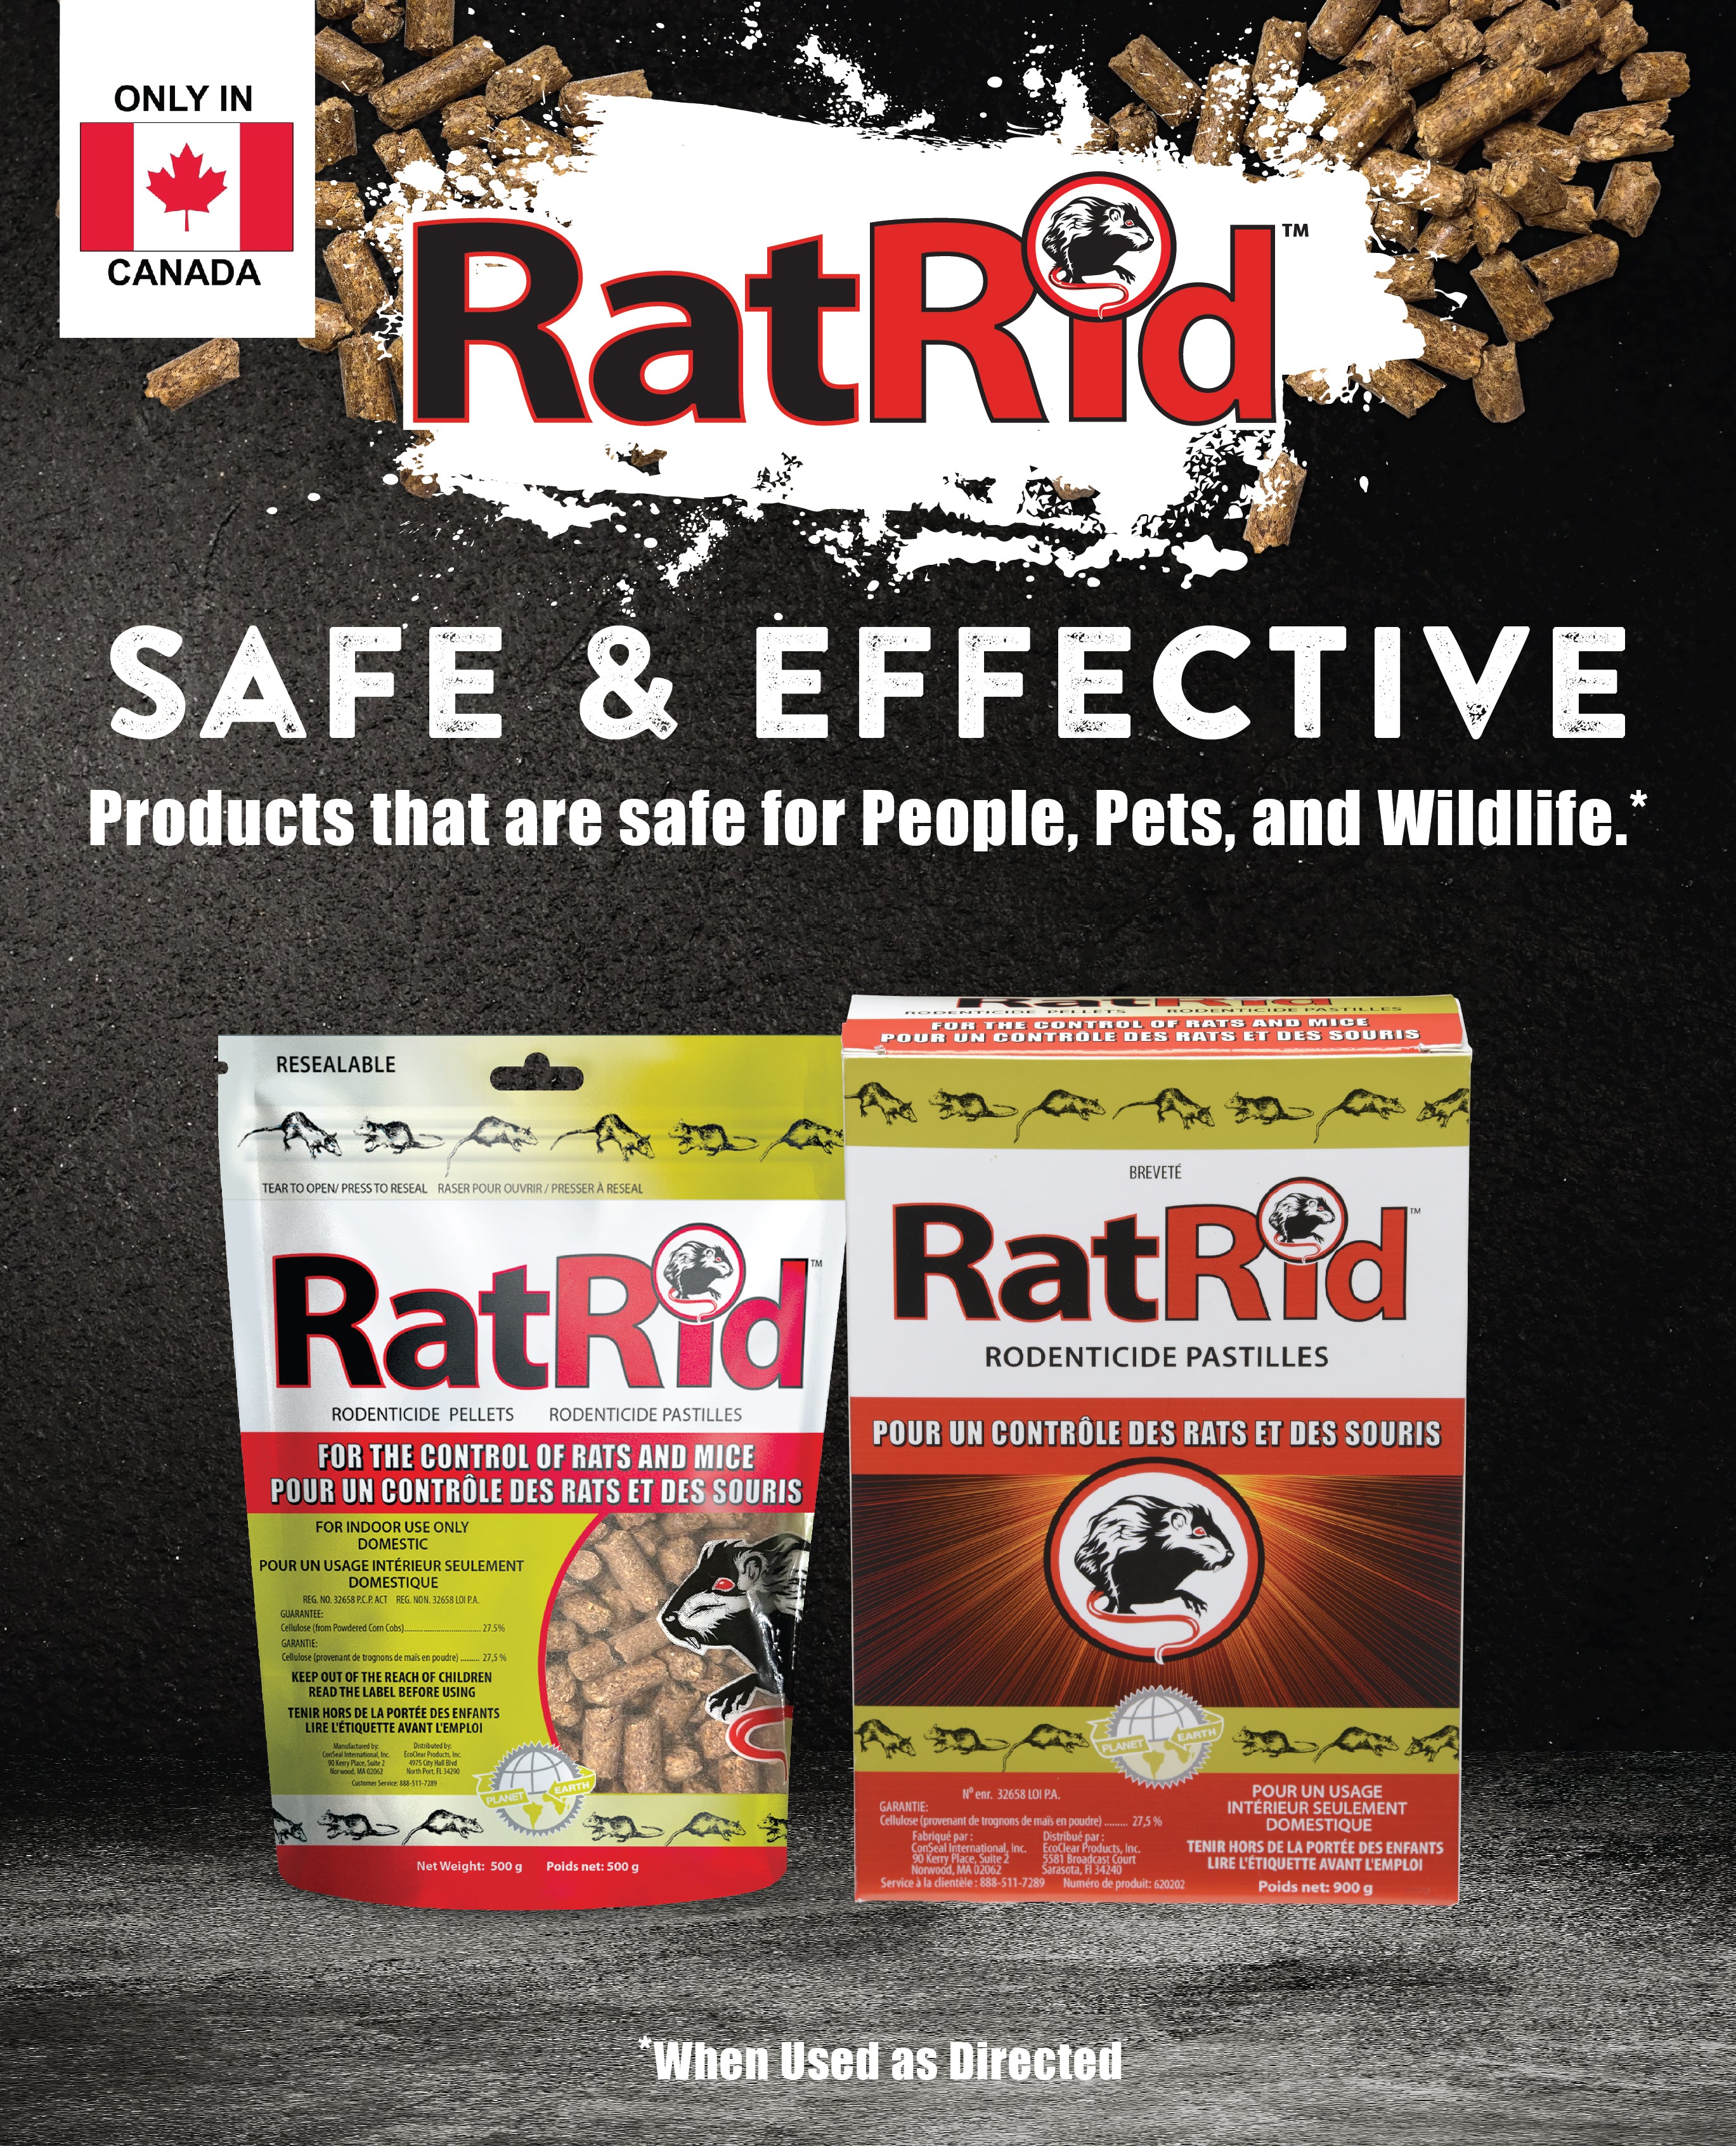 Health Risks Associated with Using Rat Poison